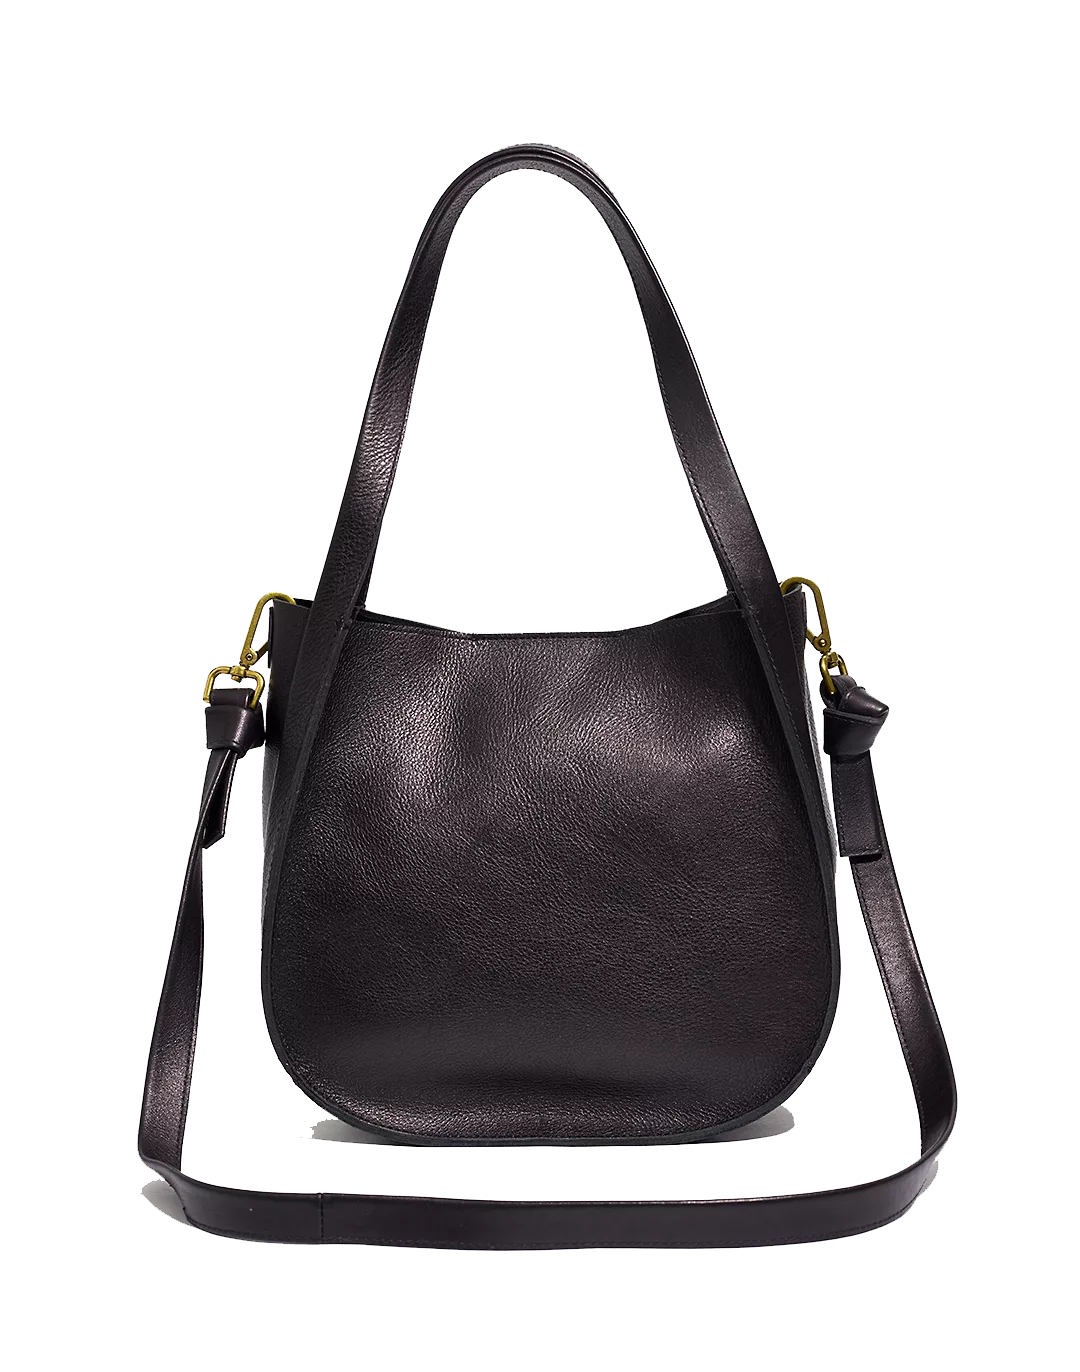 Shoulder bag with perfect curves